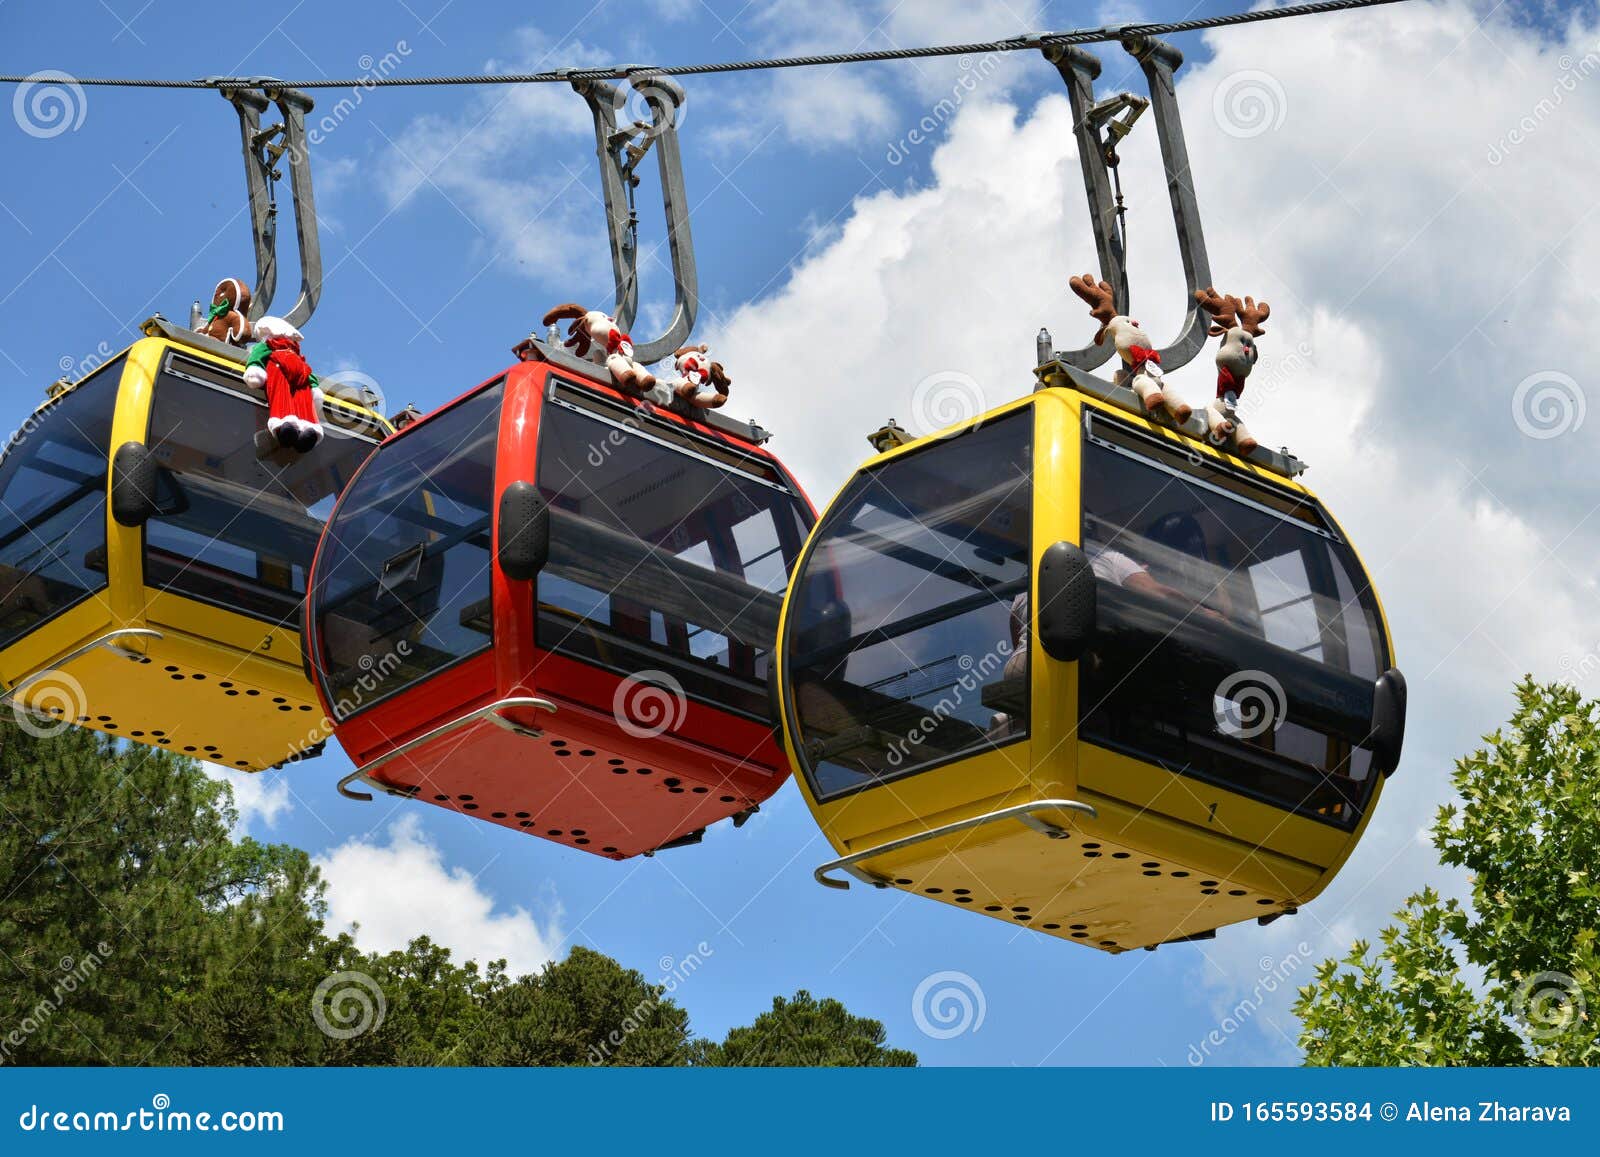 three colorful gondolas cable cars as they transport people up and down in the caracol park, brazil